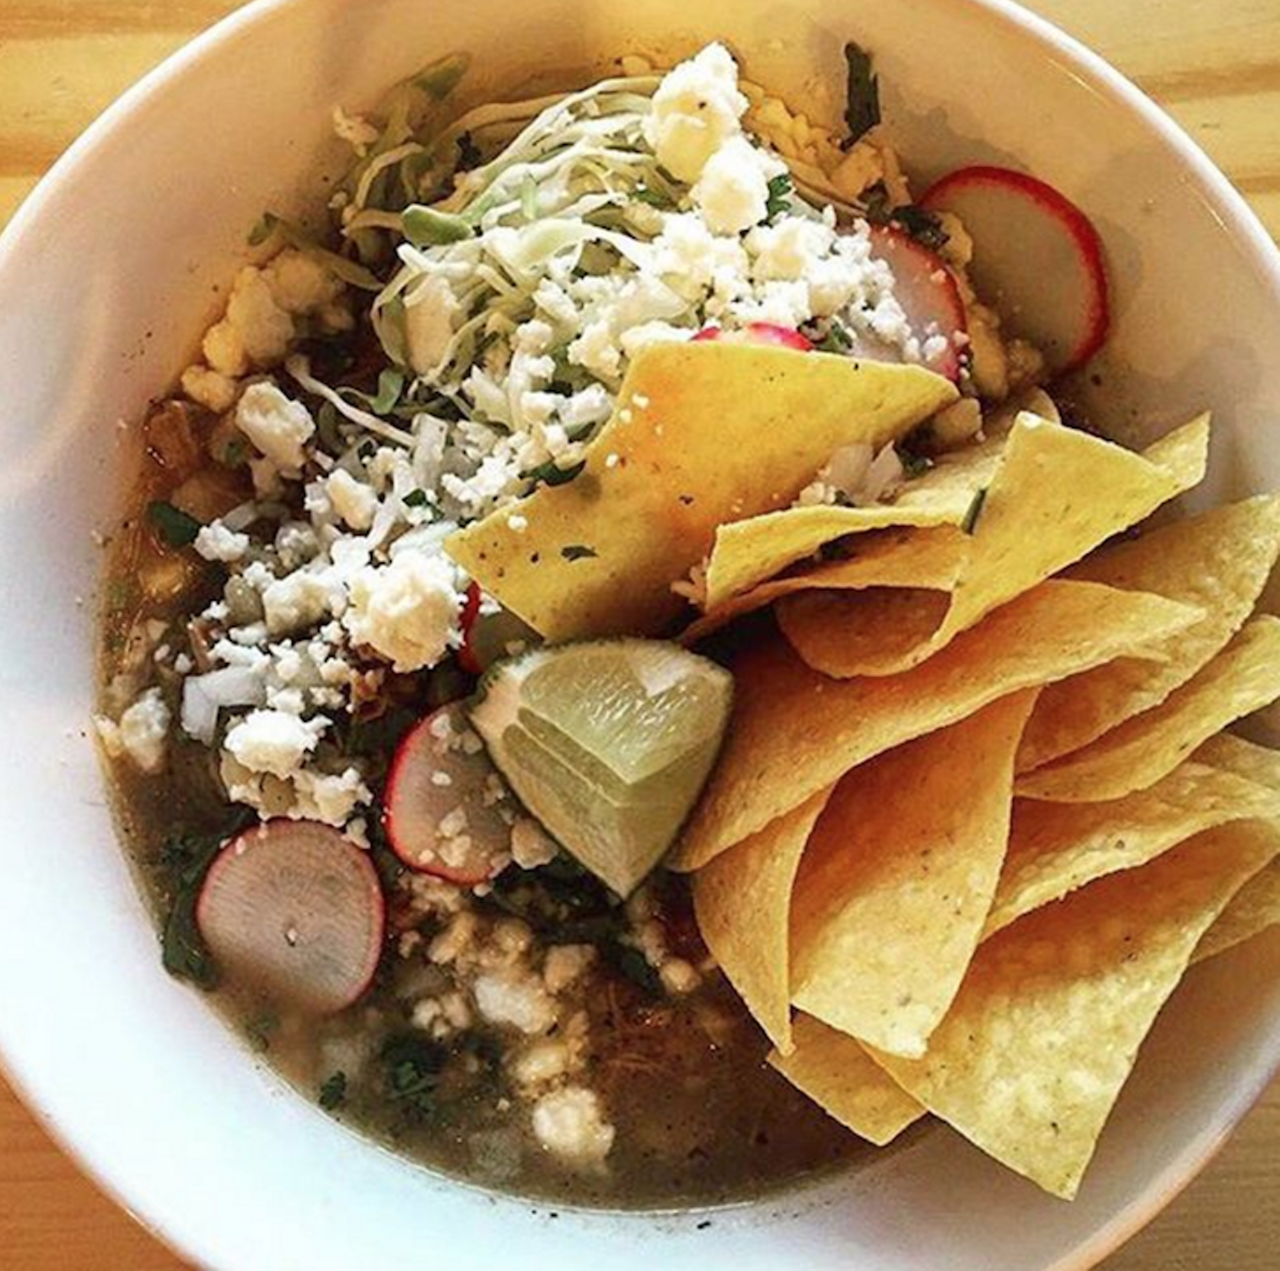 Best Way to Eat Your Greens: Pozole Verde at Black Rooster Taqueria
1323 N. Mills Ave., 407-601-0994,
Black Rooster Taqueria
How many times have we heard it: "Eat your greens!" Well, our new favorite way to follow the letter, if not at all the spirit, of the law is Black Rooster's pozole verde. A big hunk of slow-cooked pork shoulder swimming in a bowl of broth all zingy with roasted tomatillo, chile poblano, cilantro and lime, it's lush and meaty without being overpoweringly unctuous. And hey, it's garnished with radish and green cabbage &#150; practically health food, right?
Photo via blkroostertaco/Instagram